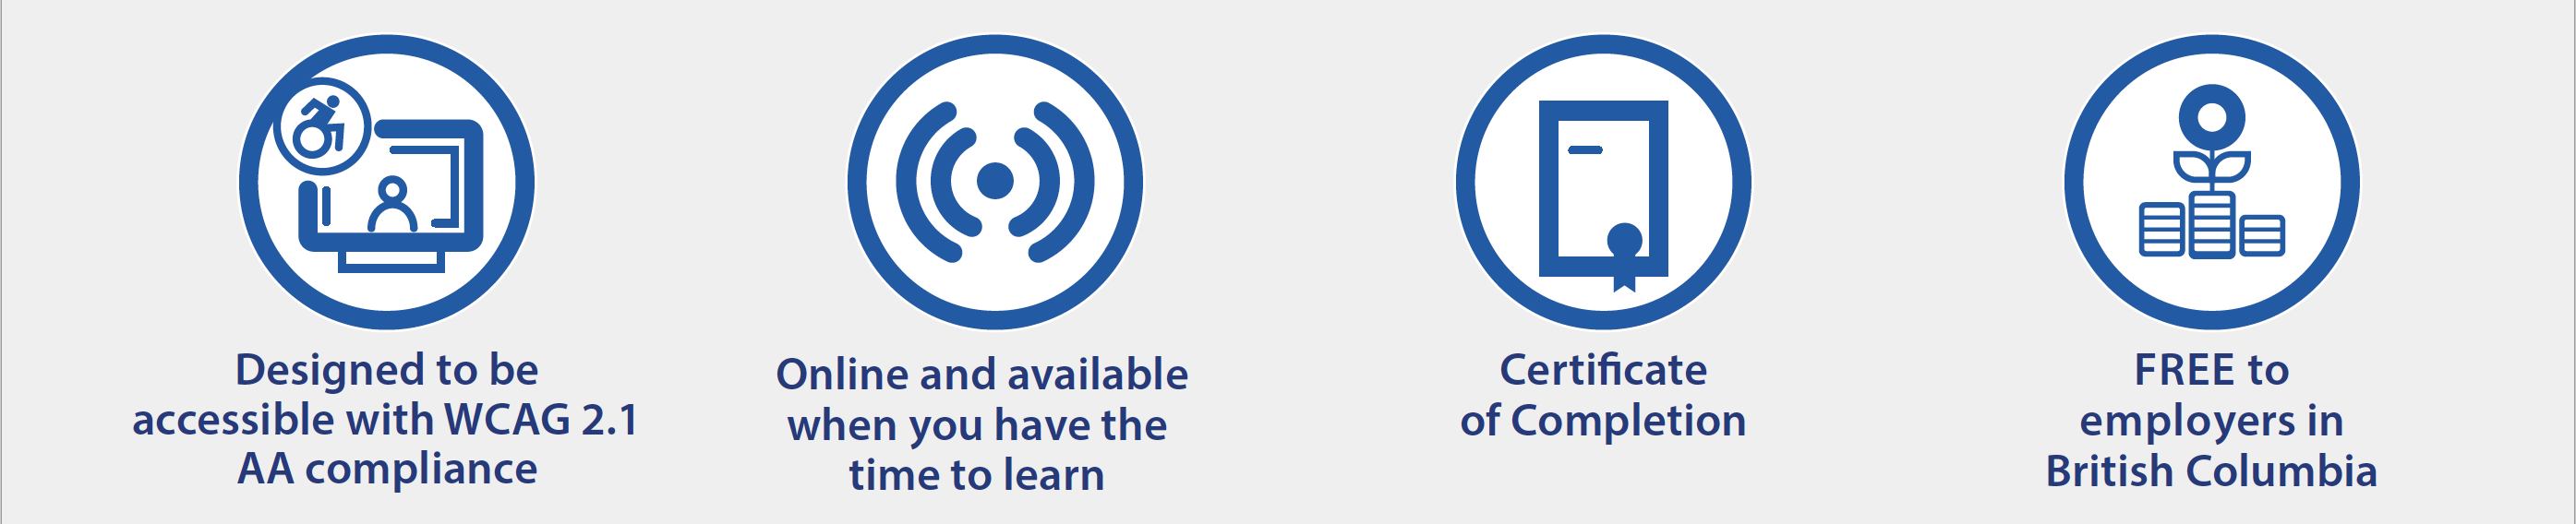 Grey banner with 4 blue icons about the courses. Text reads: Designed to be accessible with WCAG 2.1 AA compliance, Online and available when you have the time to learn, Certificate of completion, FREE to employers in British Columbia.